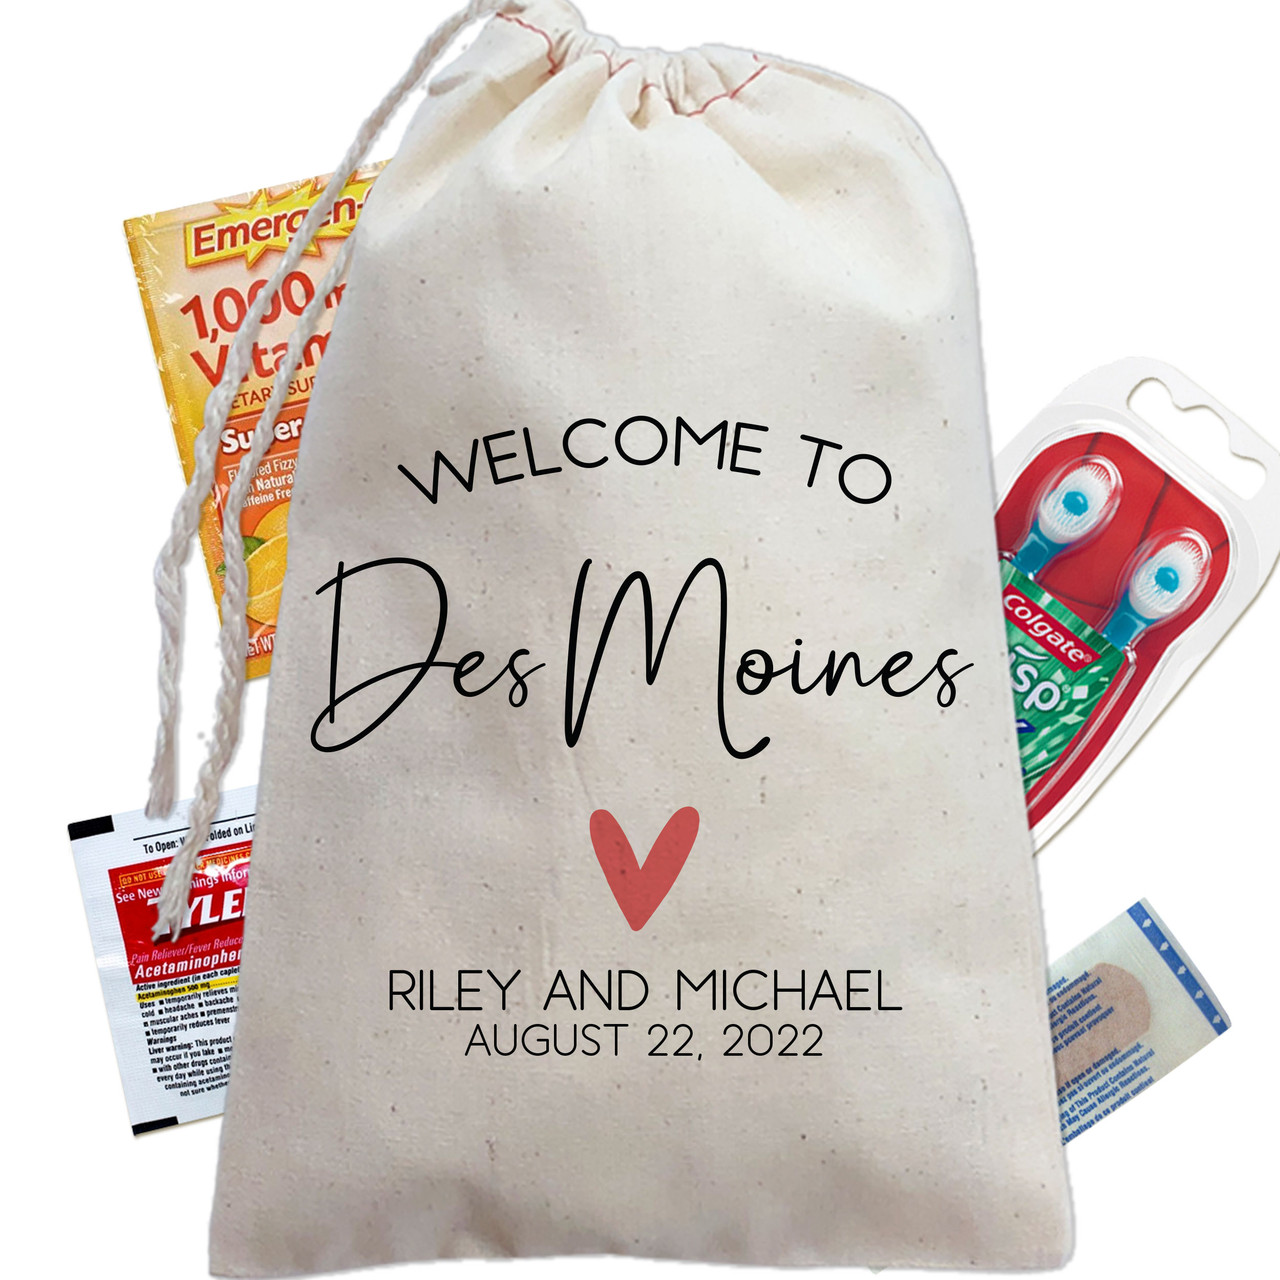 What to Include in Destination Wedding Welcome Bags